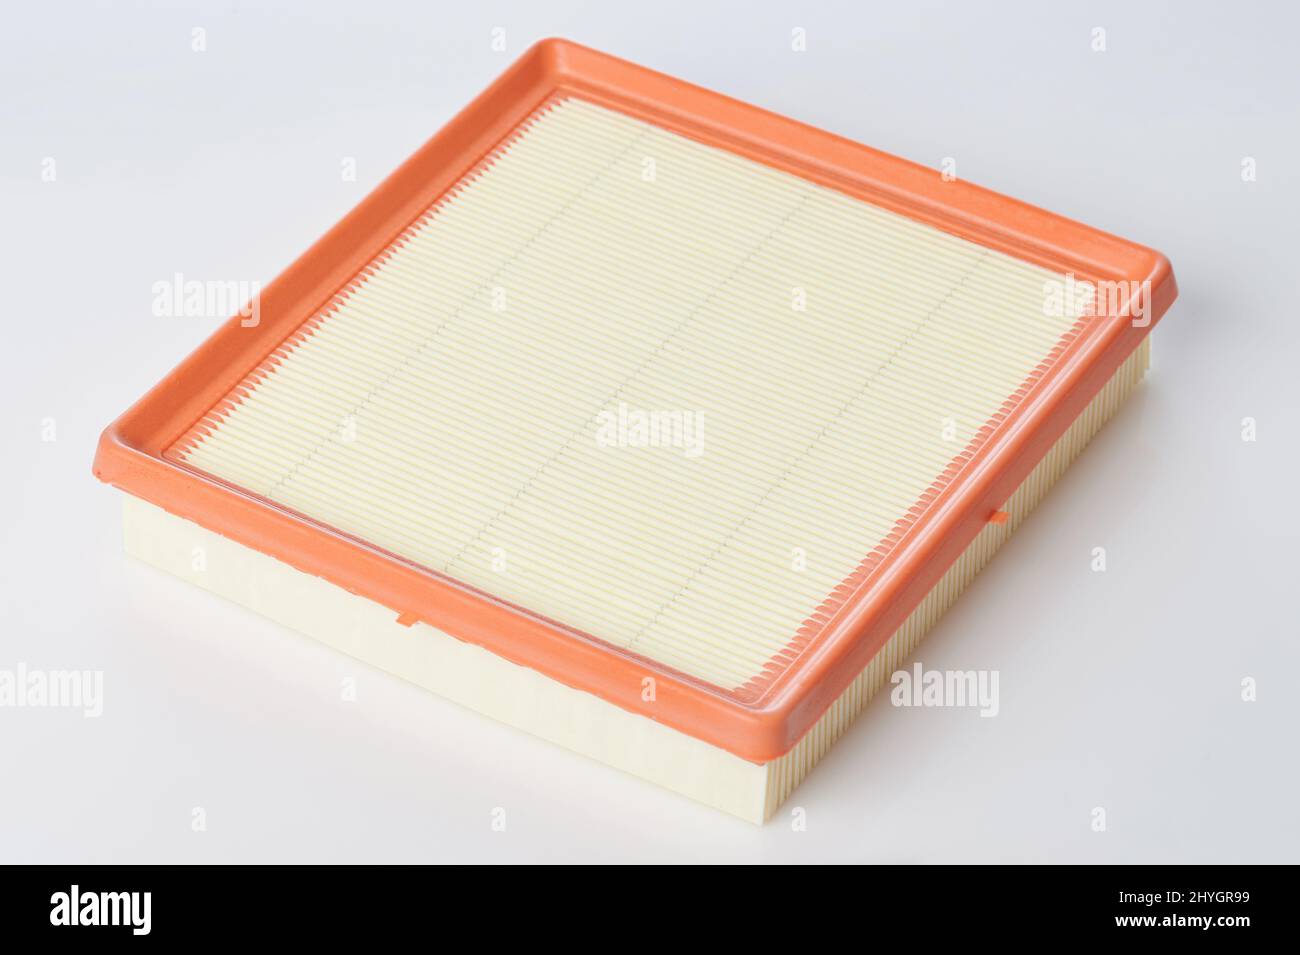 Clean air filter for car isometric view isolated Stock Photo